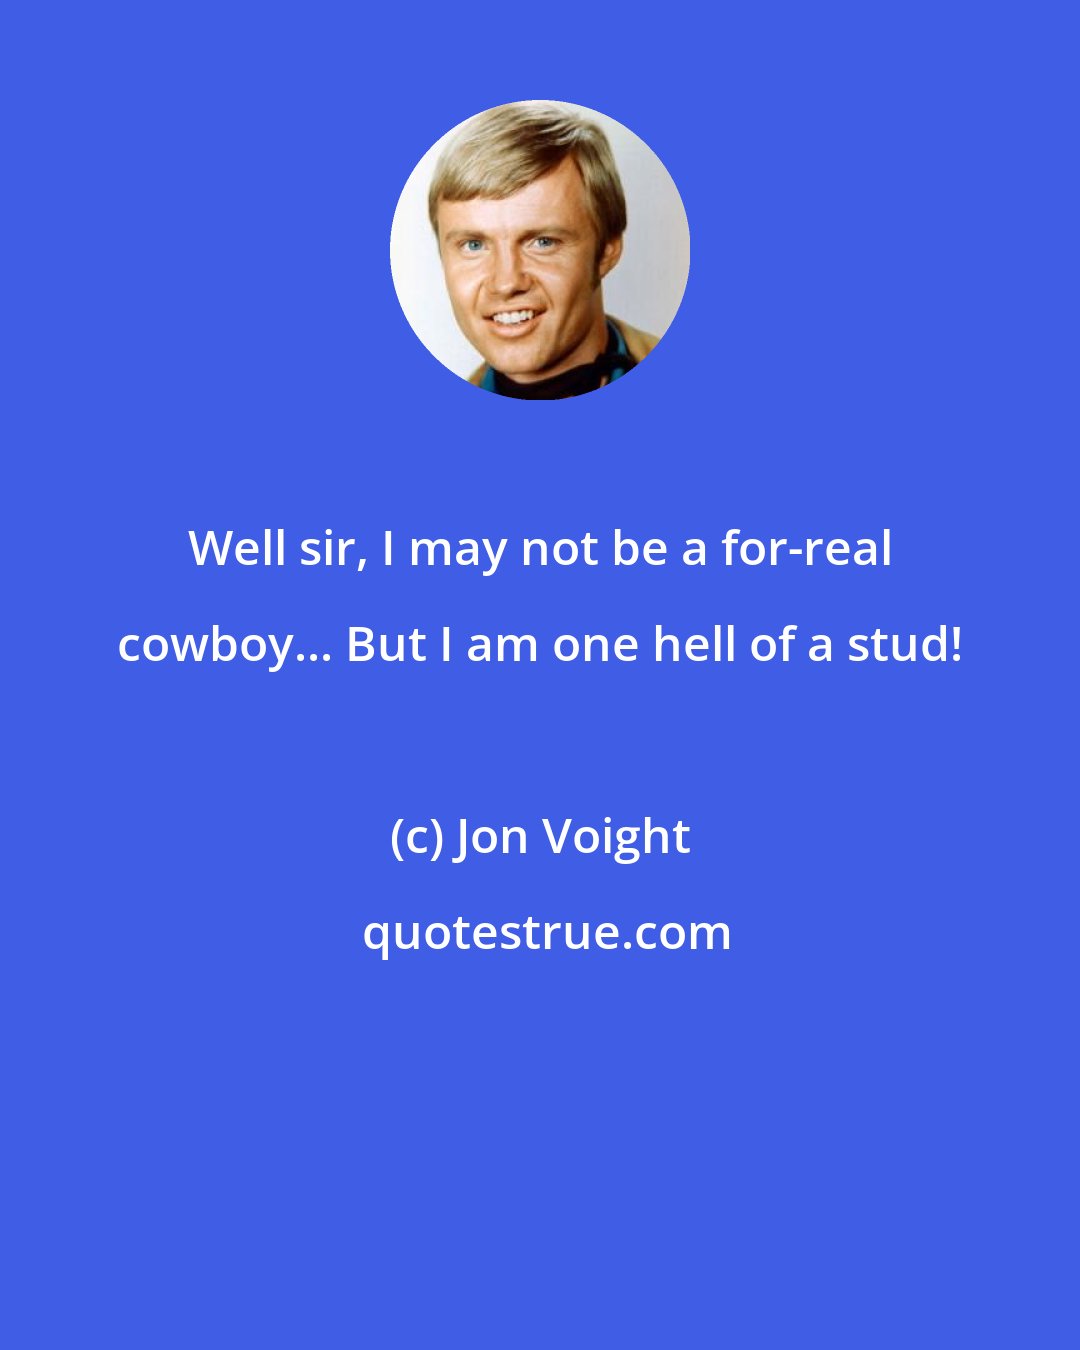 Jon Voight: Well sir, I may not be a for-real cowboy... But I am one hell of a stud!